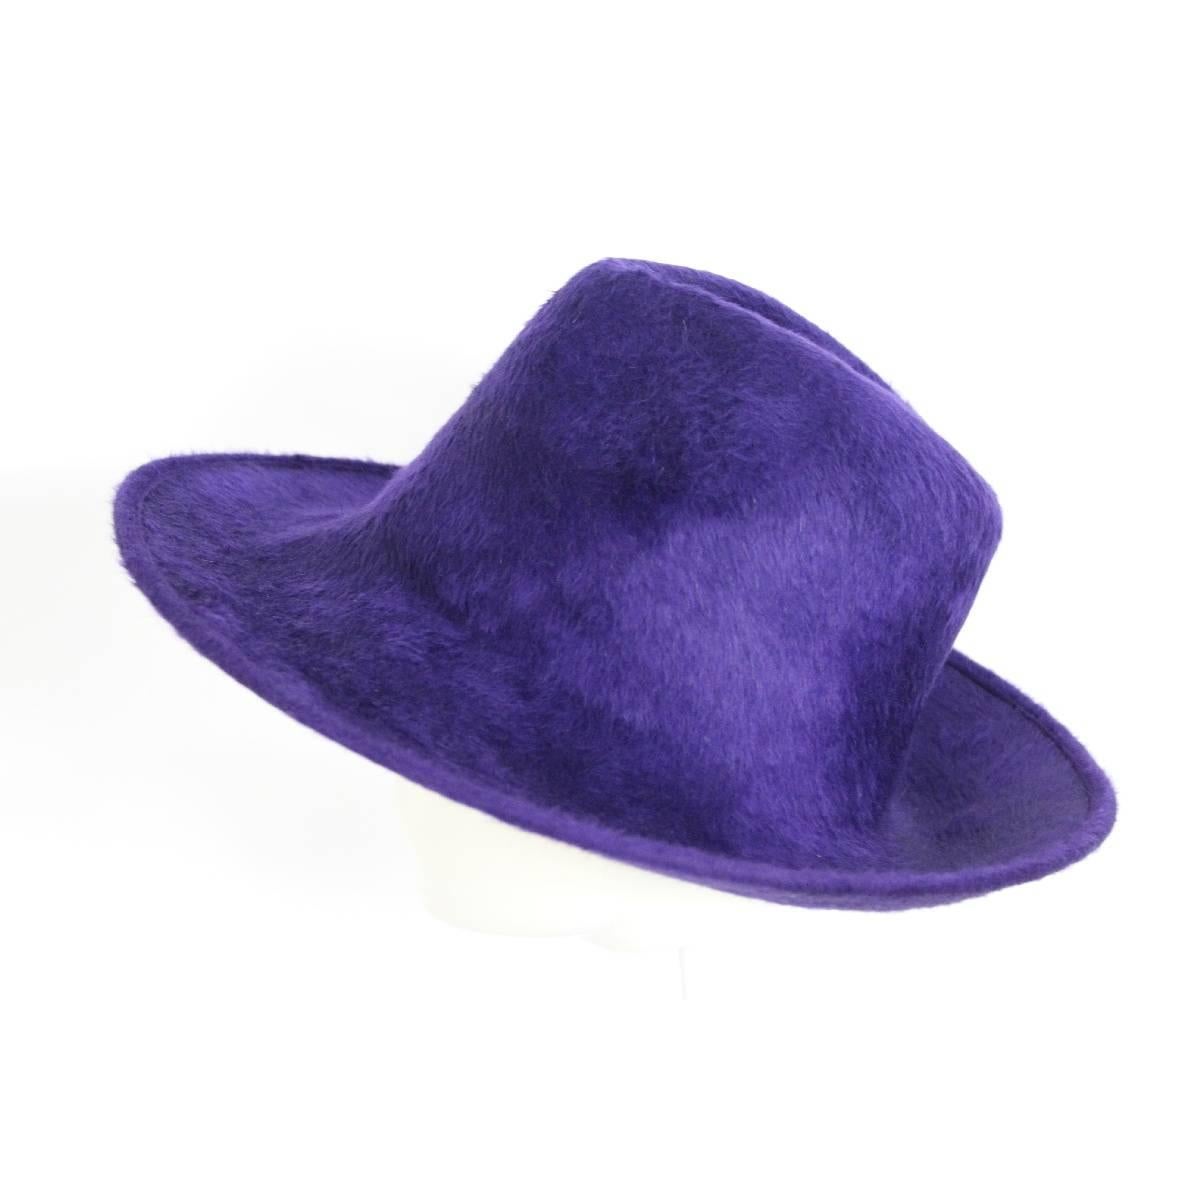 Philip Treacy purple wool felt hat for women, size M, on the hair imprinted on the horse logo.

Measures:
Size: M ;  7 US
Circumference: 56 cm

Composition: 100% wool
Color: purple
Condition: excellent condition